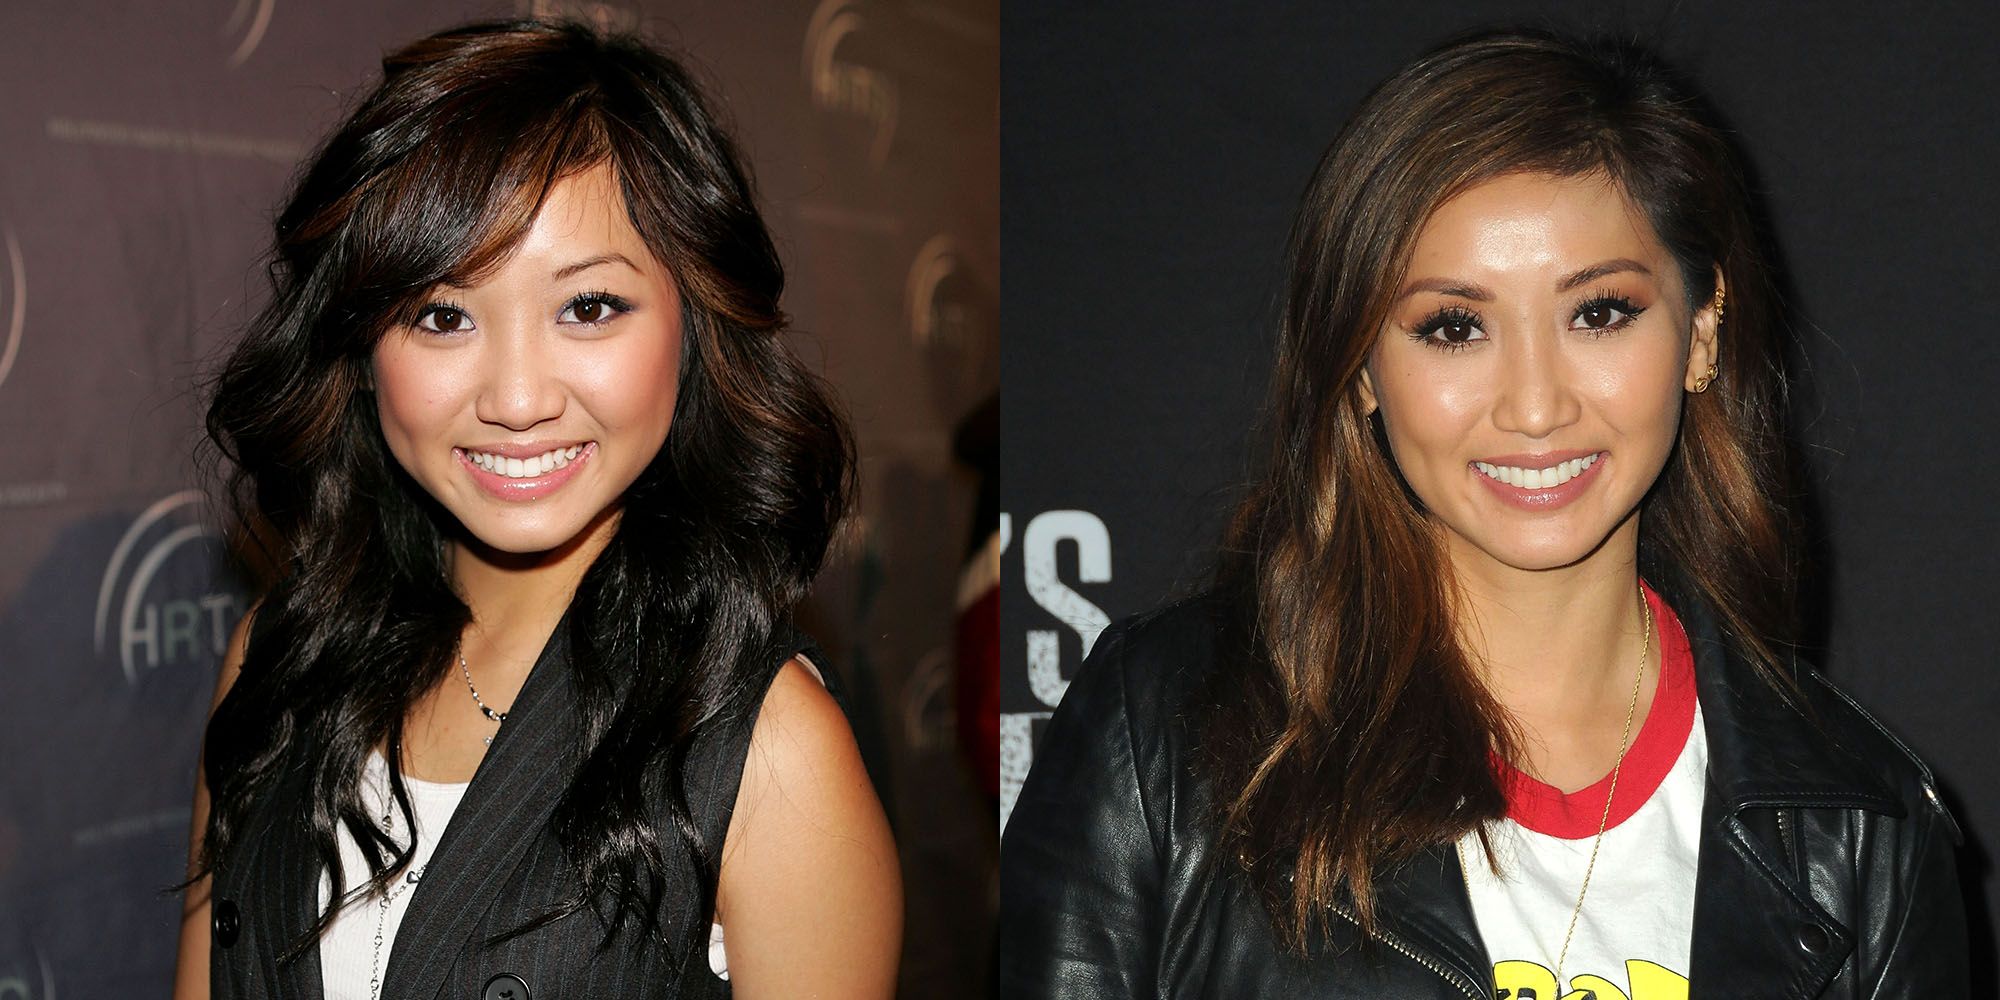 Brenda Song Porn Sweet Life - Photos of 50 Disney Child Stars Then and Now